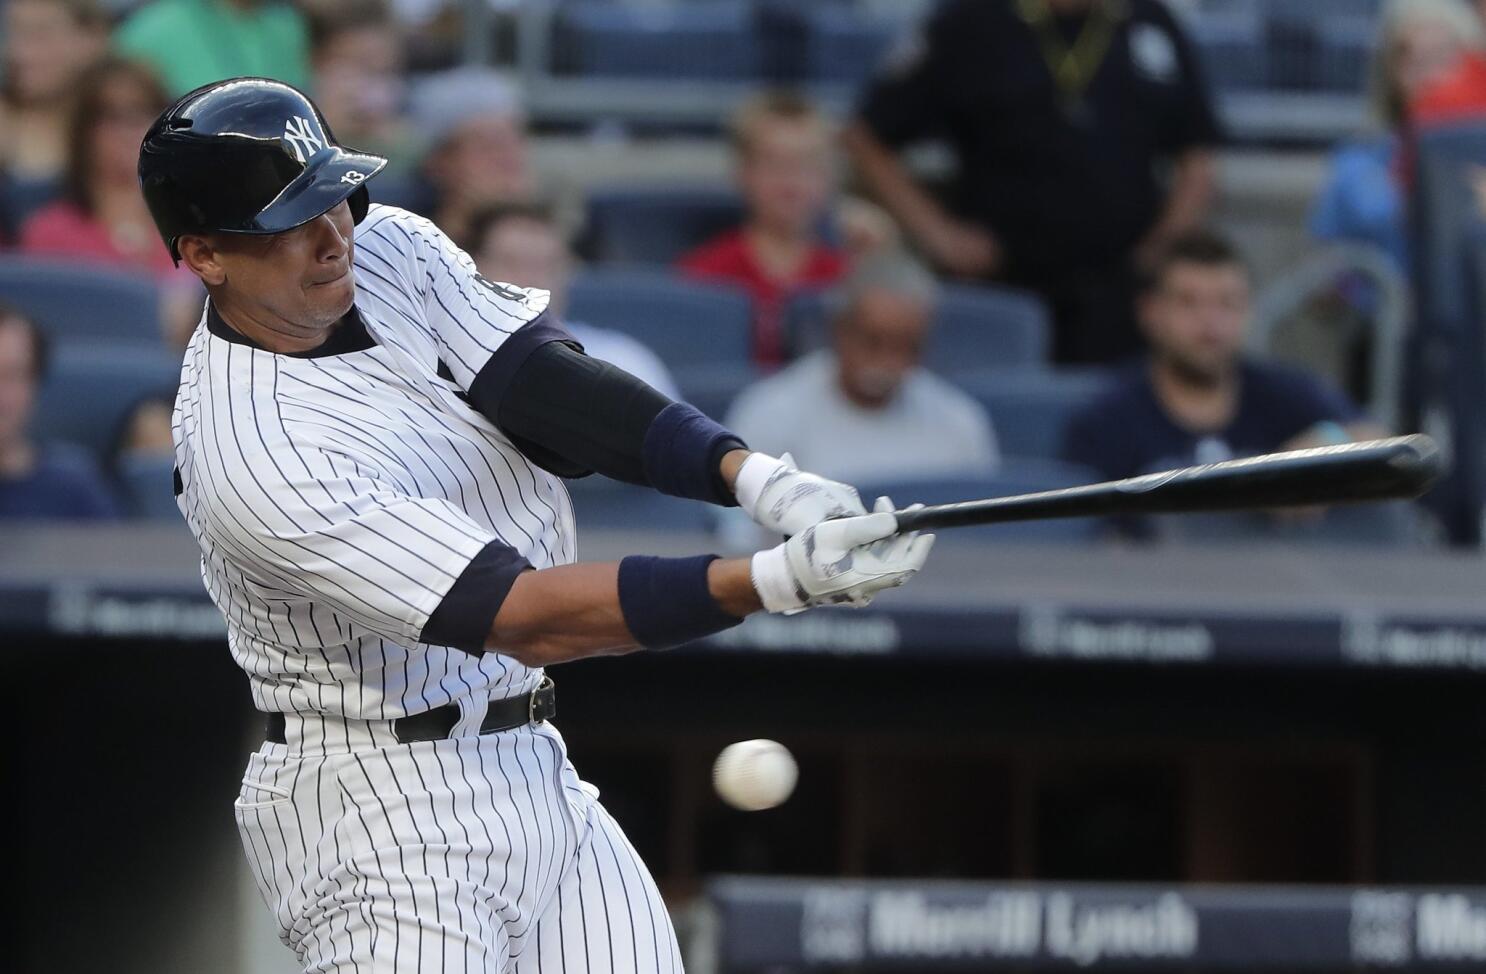 Carlos Beltran hopes to earn first ring with Yankees